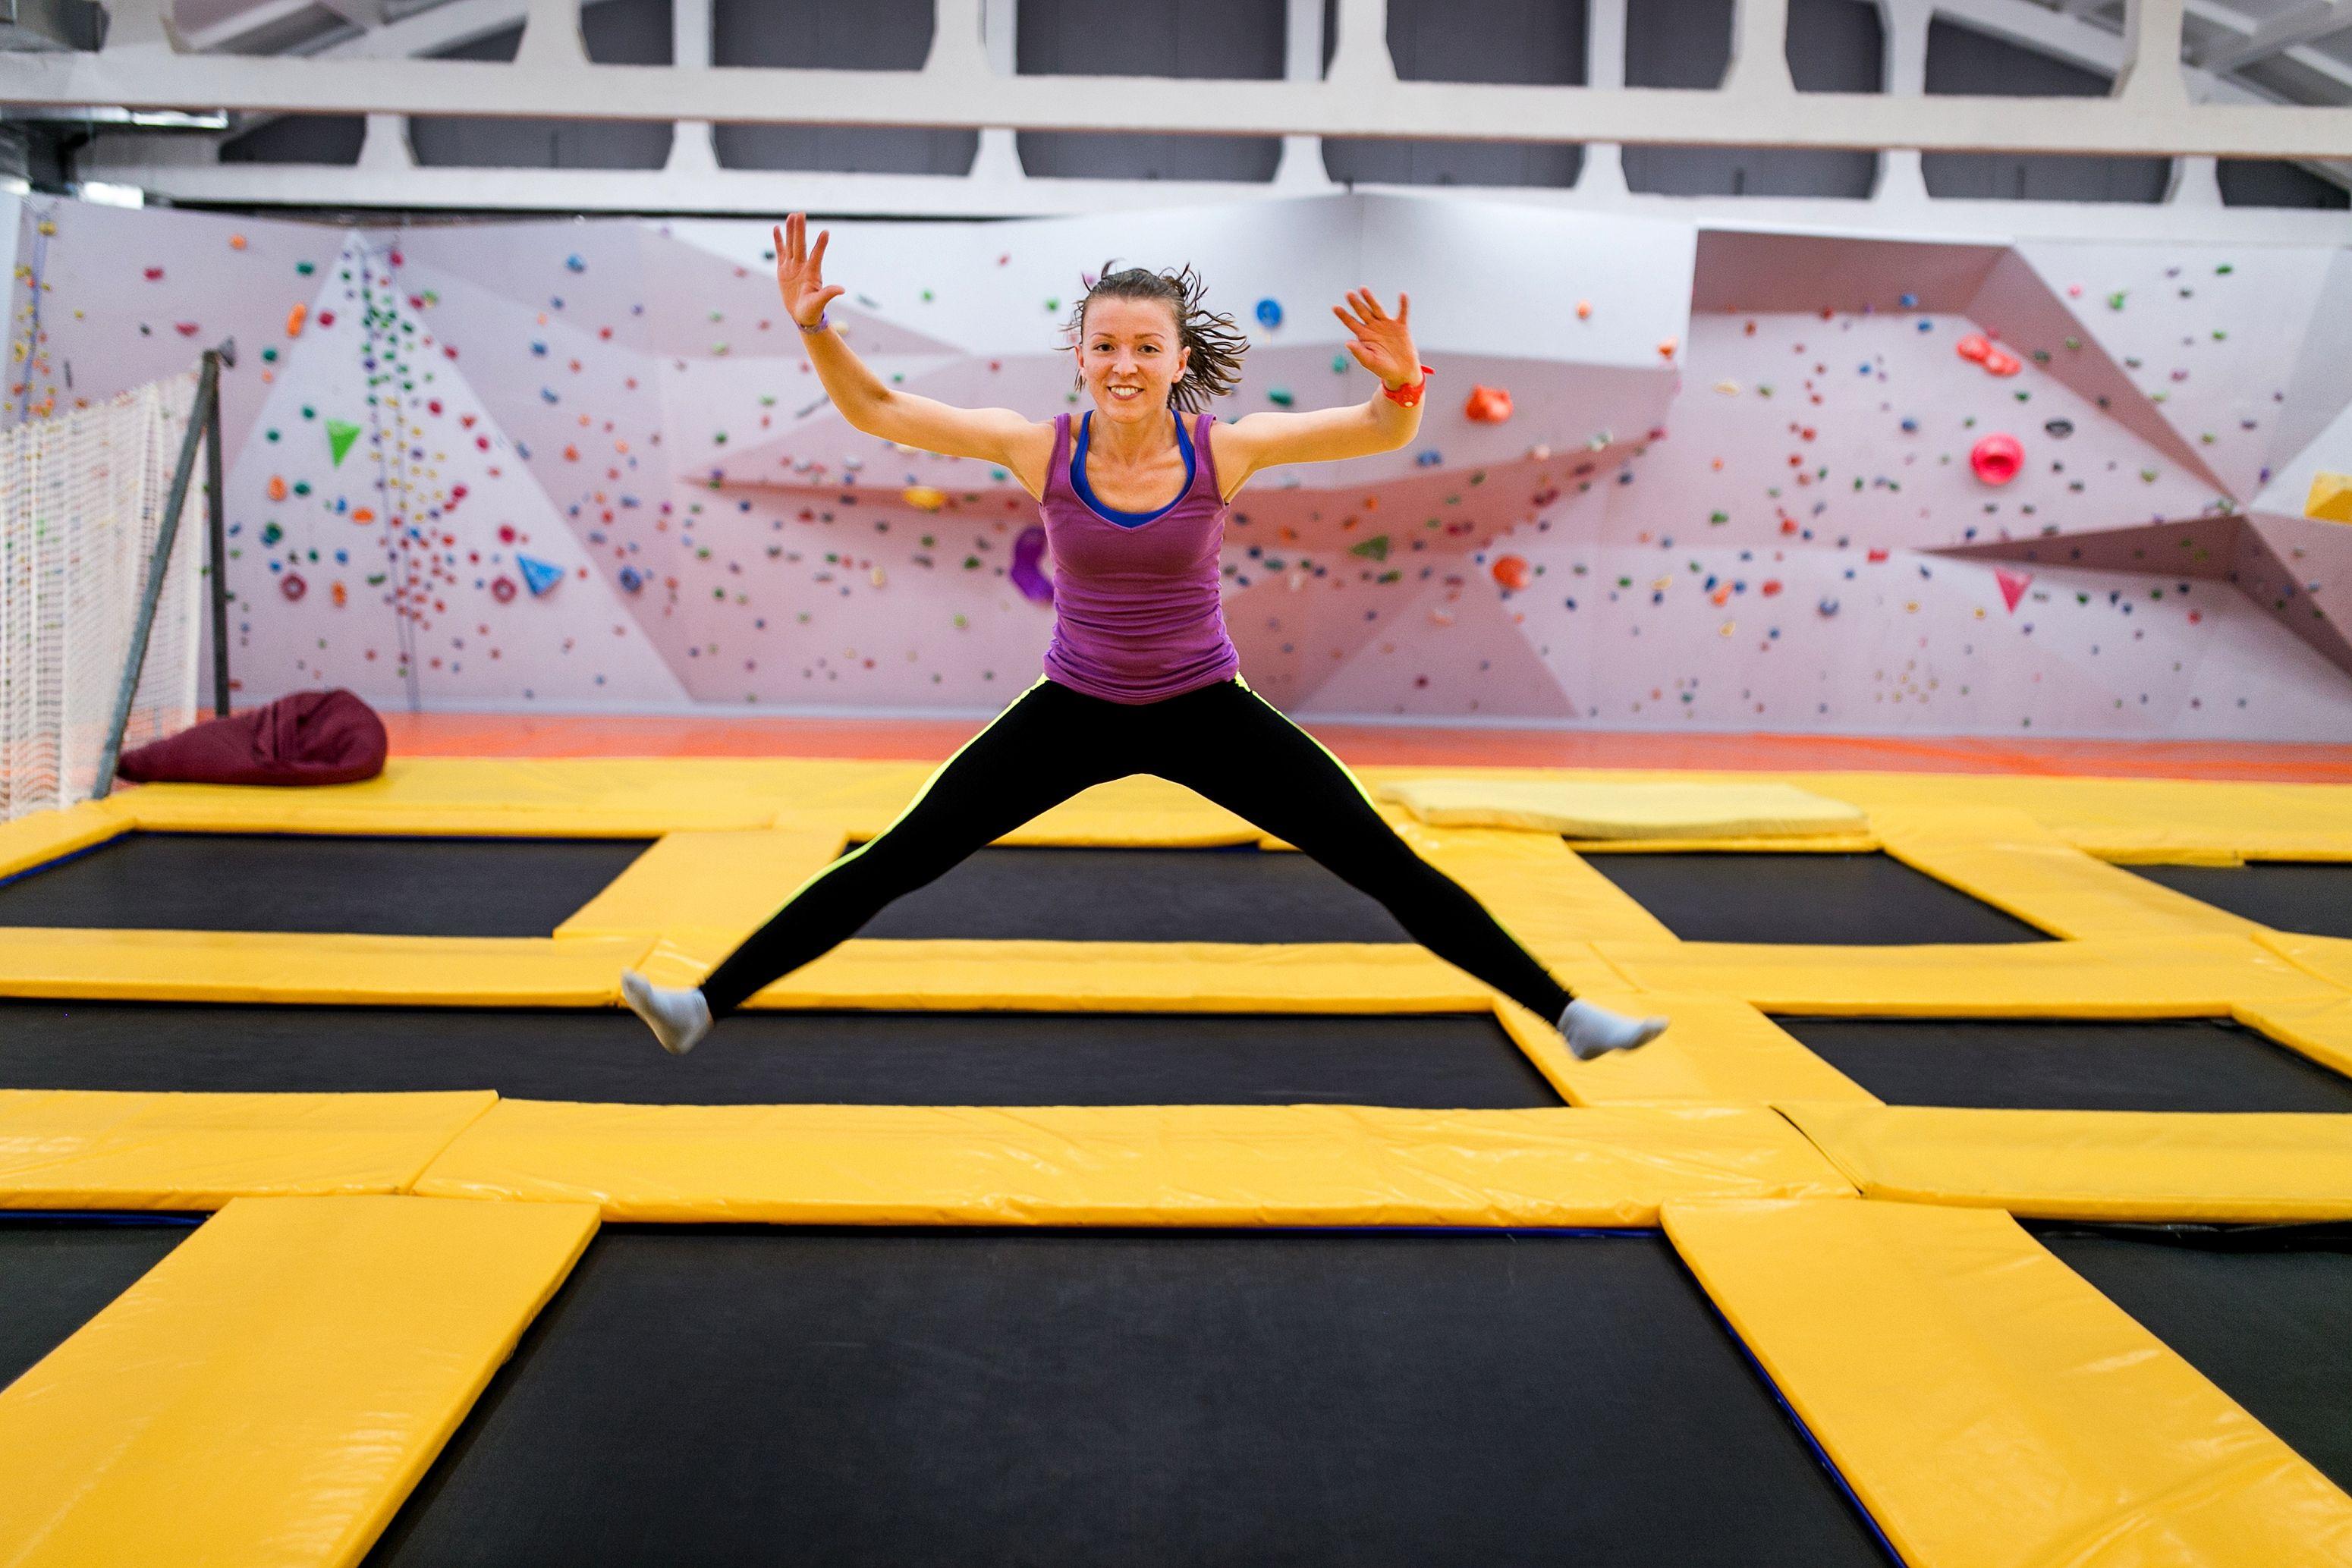 Behind the bounce: trampoline science